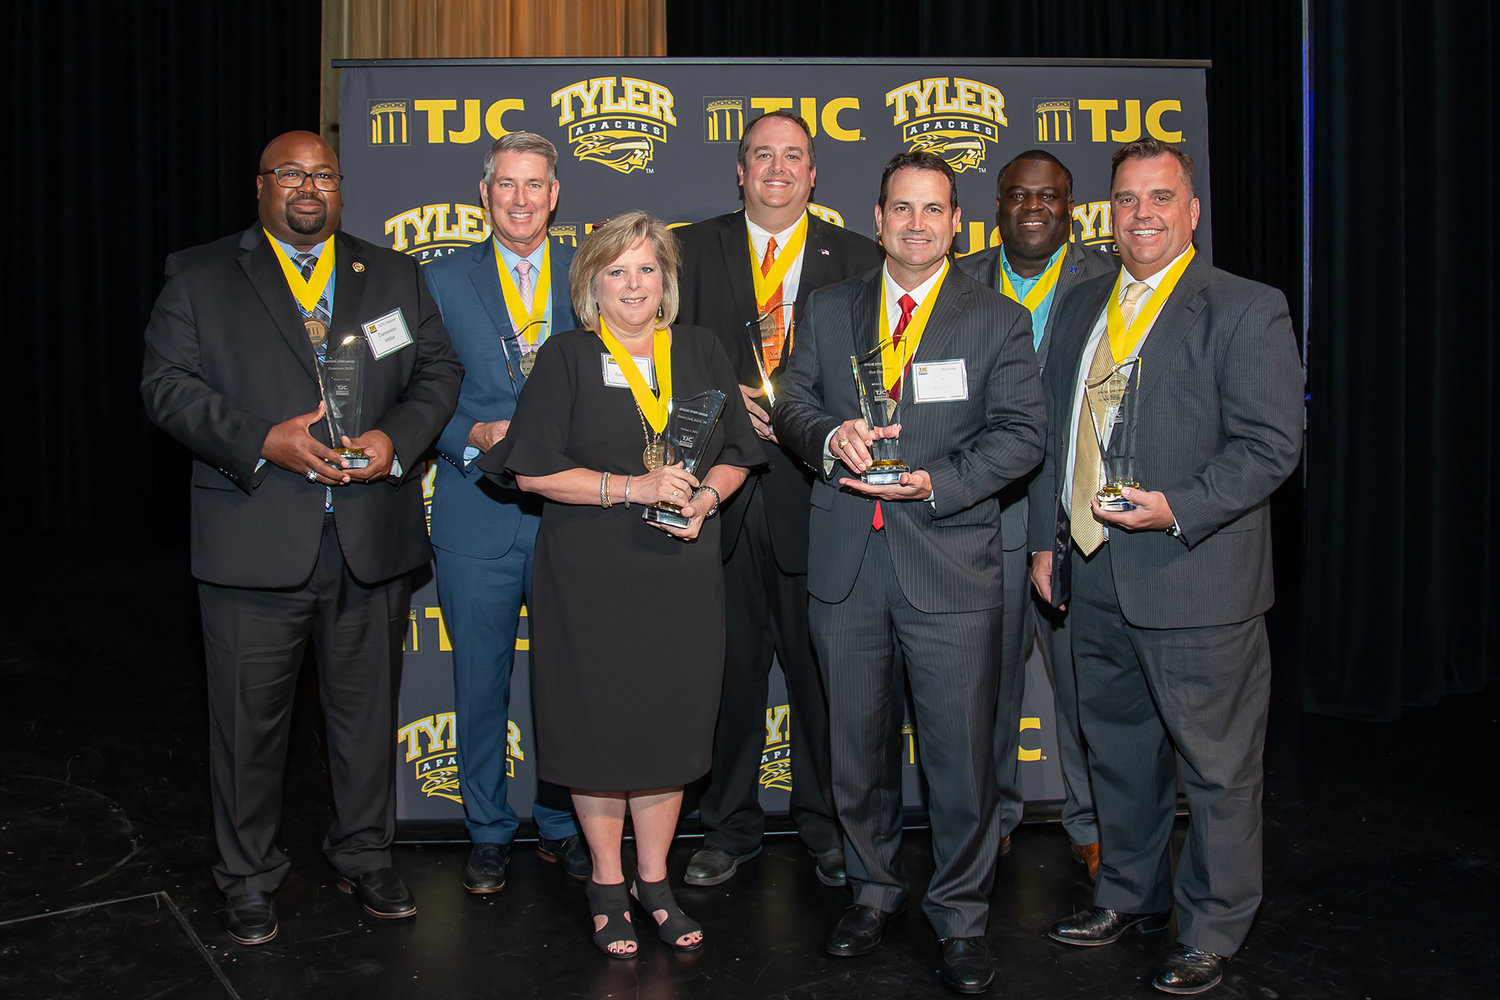 TJC superintendents, from left, alumni awards honorees Damenion Miller, Winona ISD superintendent; Stan Surratt, Lindale ISD superintendent; Dr. Donni Cook, Chapel Hill ISD superintendent (retired); J. Cody Mize, Mineola ISD superintendent; Don Dunn, Van ISD superintendent; Lamond Dean, Chapel Hill ISD superintendent; and Dr. Marty L. Crawford, Tyler ISD superintendent. Not pictured: Micah Lewis, Grand Saline superintendent.